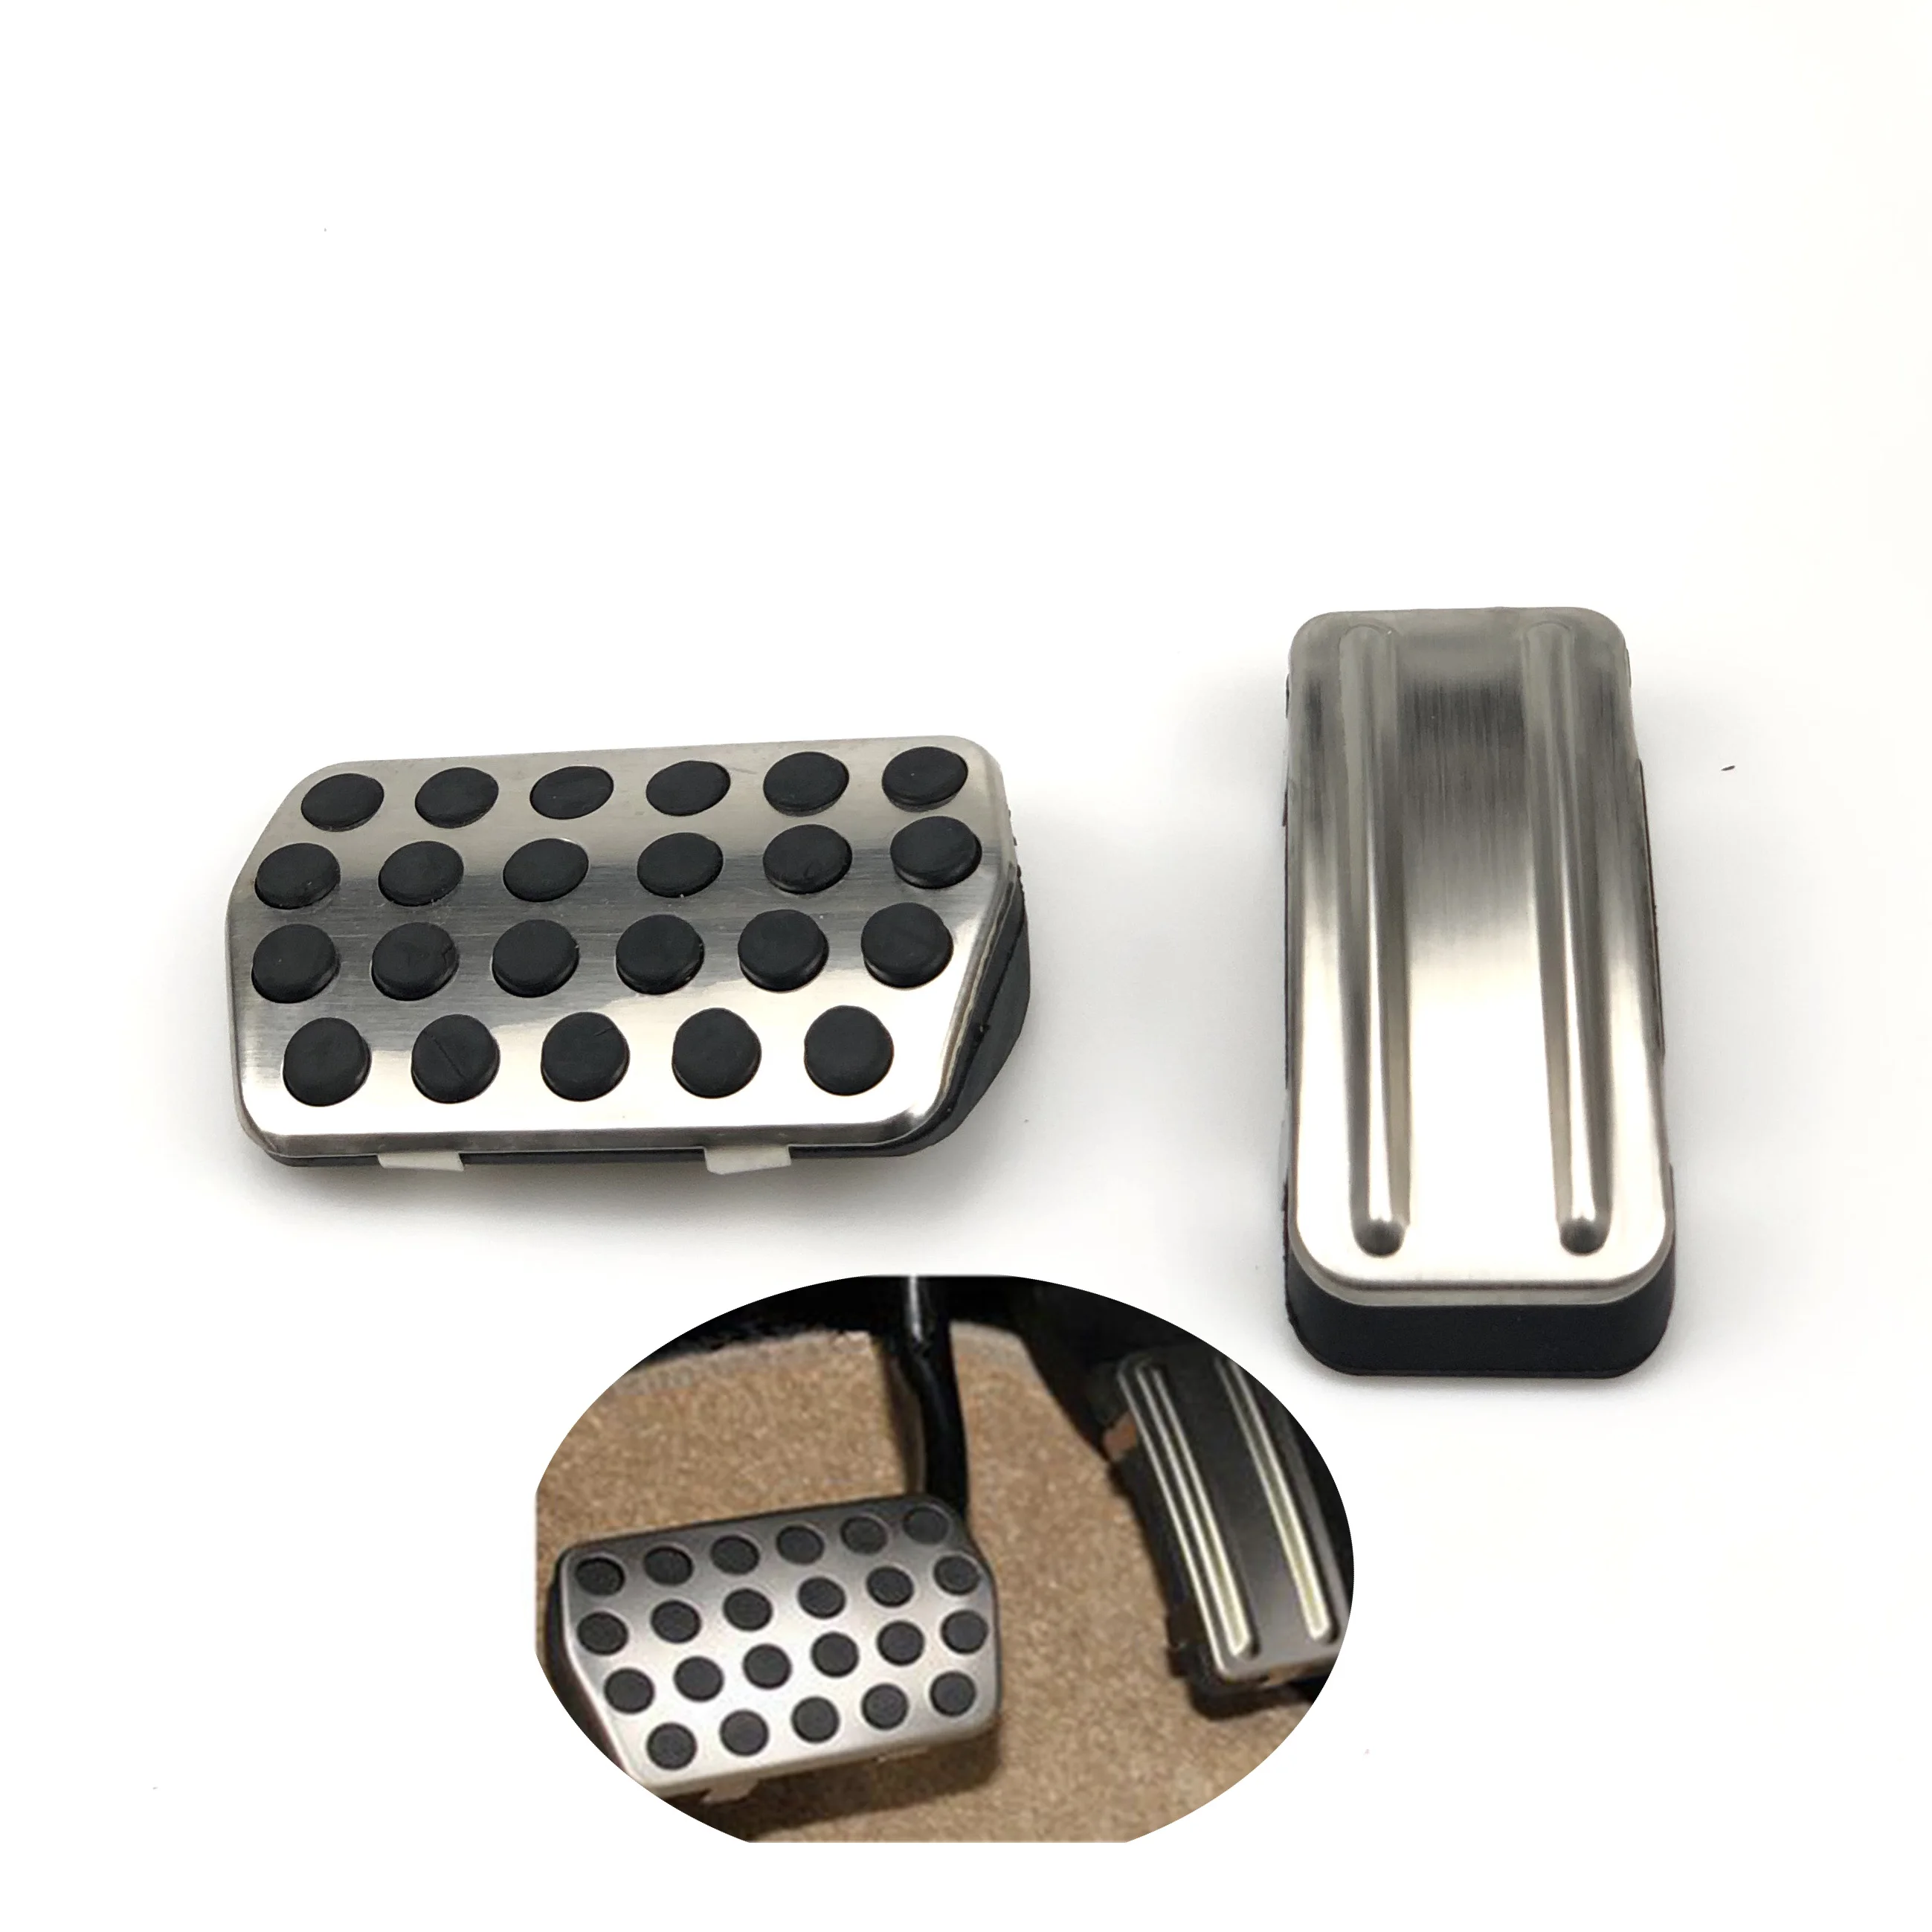 

Car styling Stainless steel Pedal For Ford Focus Kuga Escape Escort C-Max CMax S-Max For Mazda 3 For LINCOLN MKC car Accessories